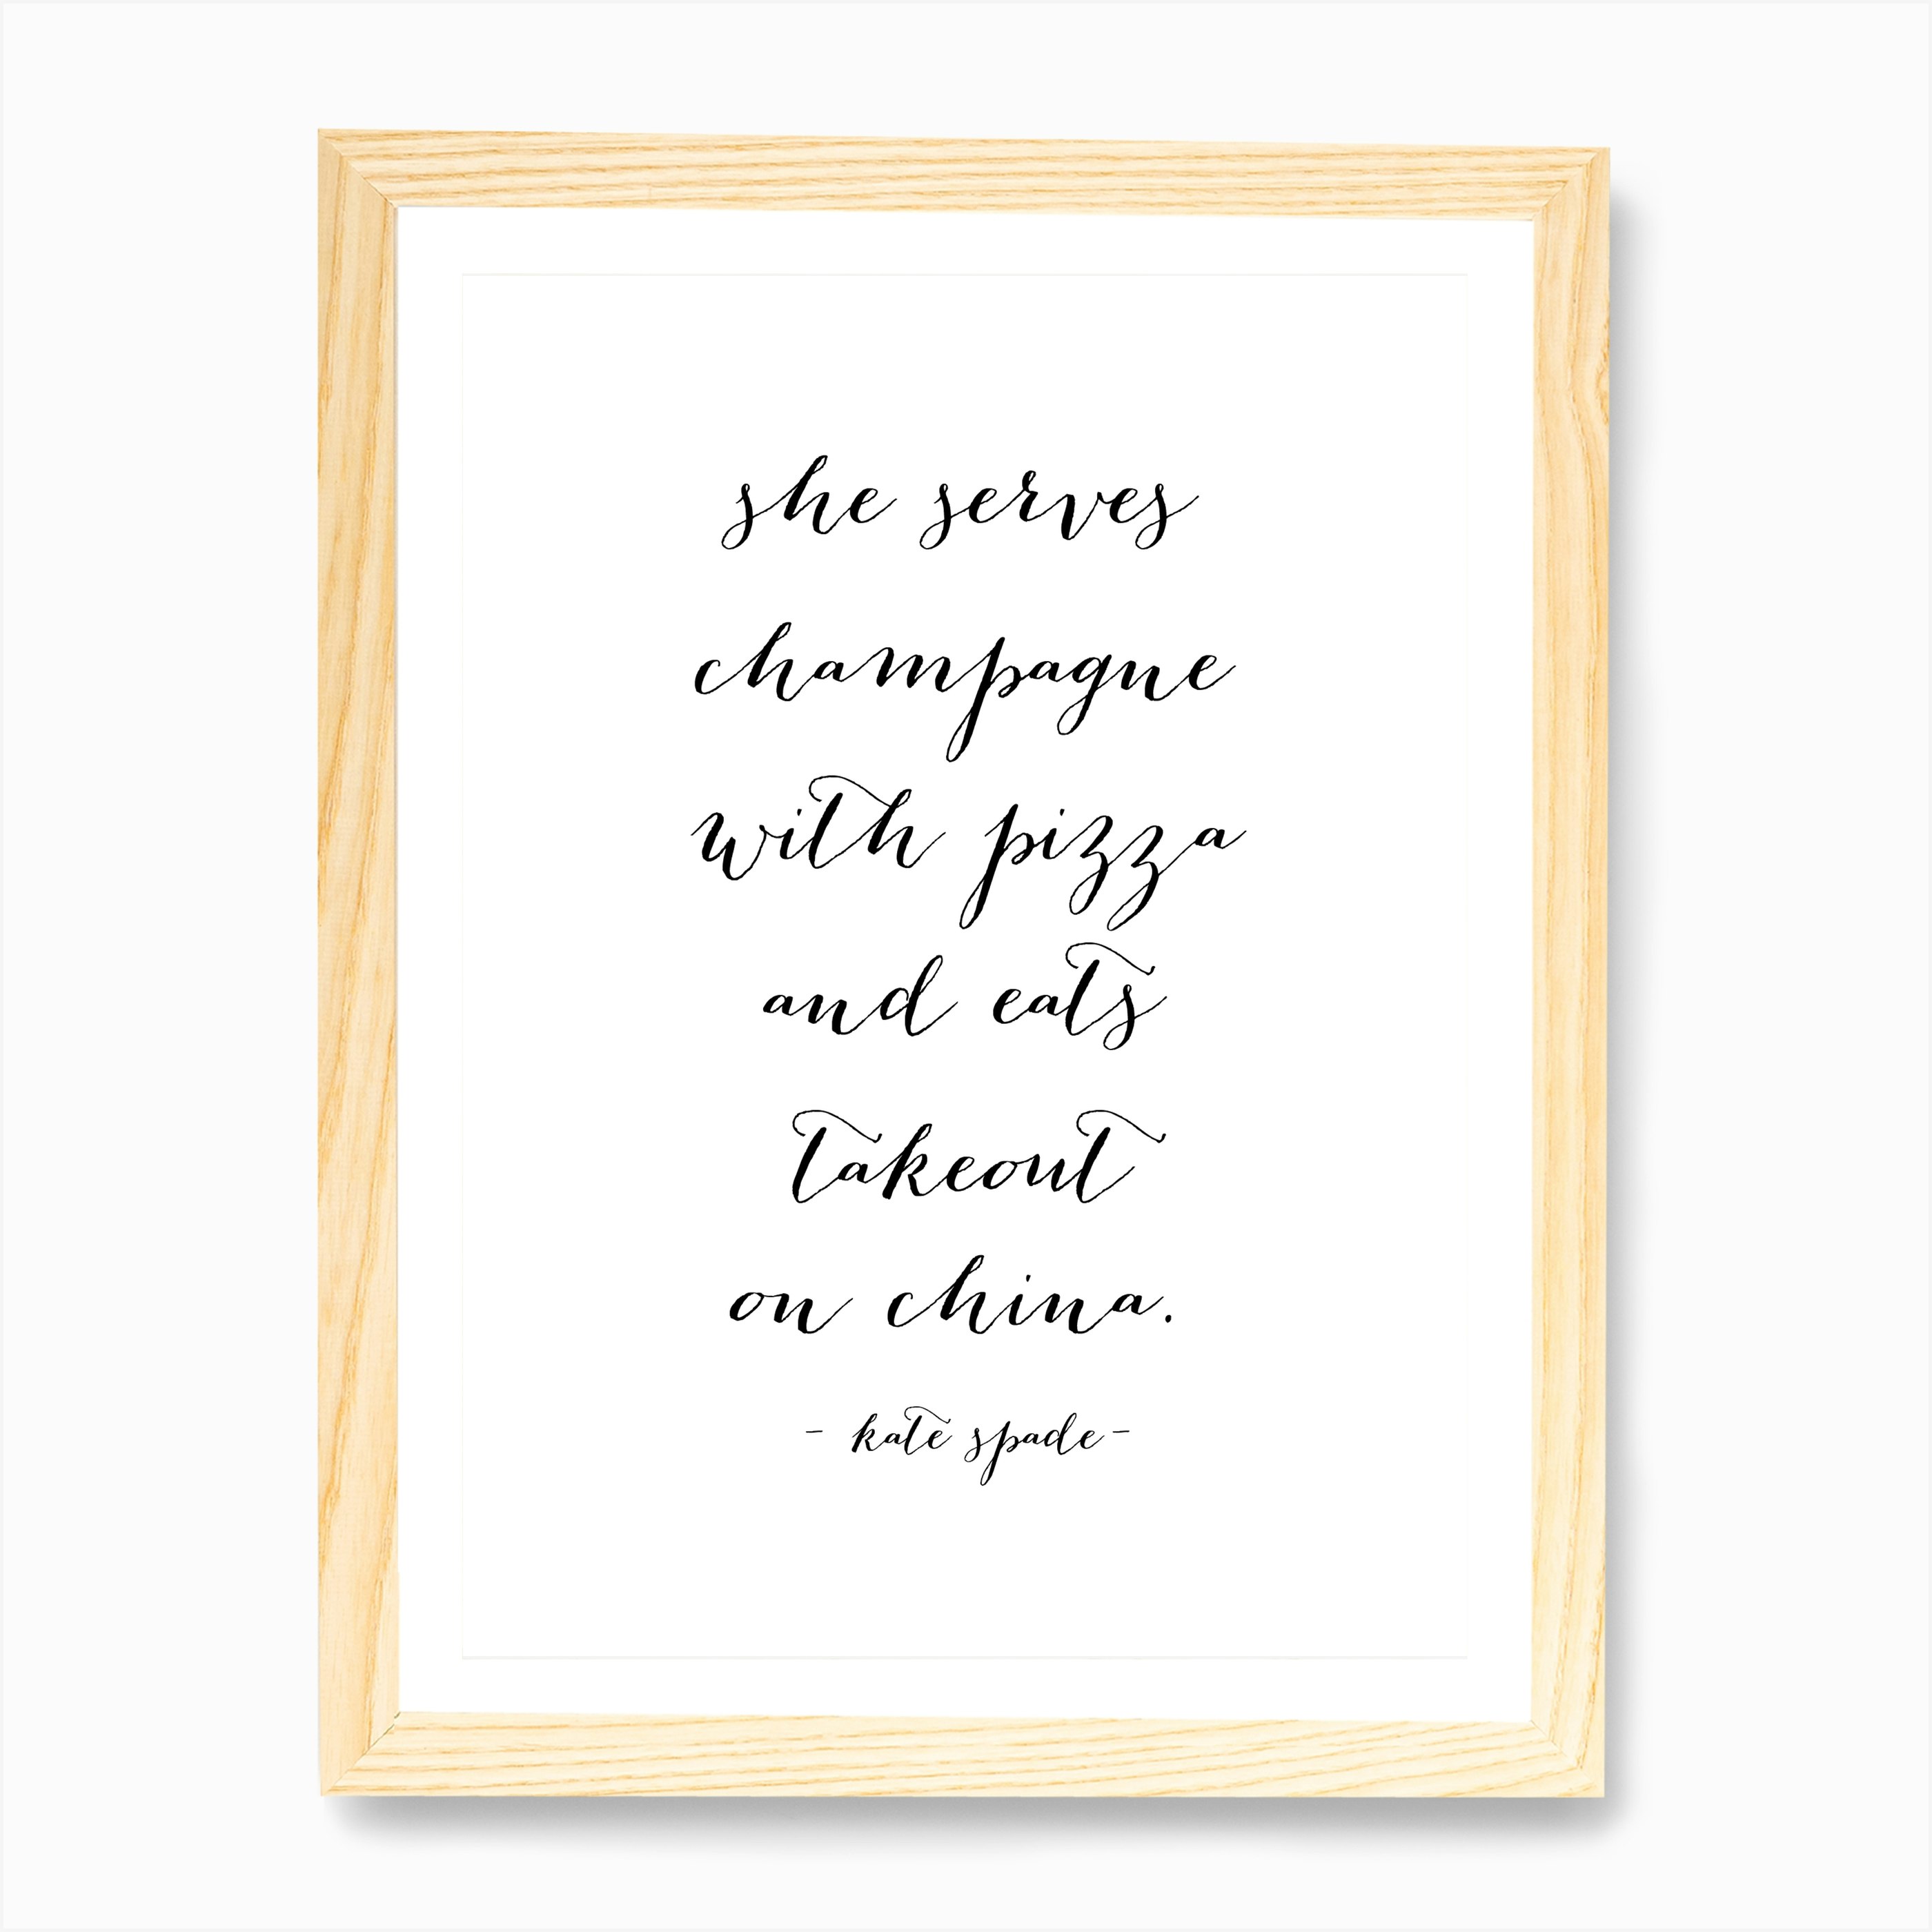 She Serves Champagne With Pizza And Eats Takeout On China Kate Spade Quote Art  Print by Typologie Paper Co - Fy